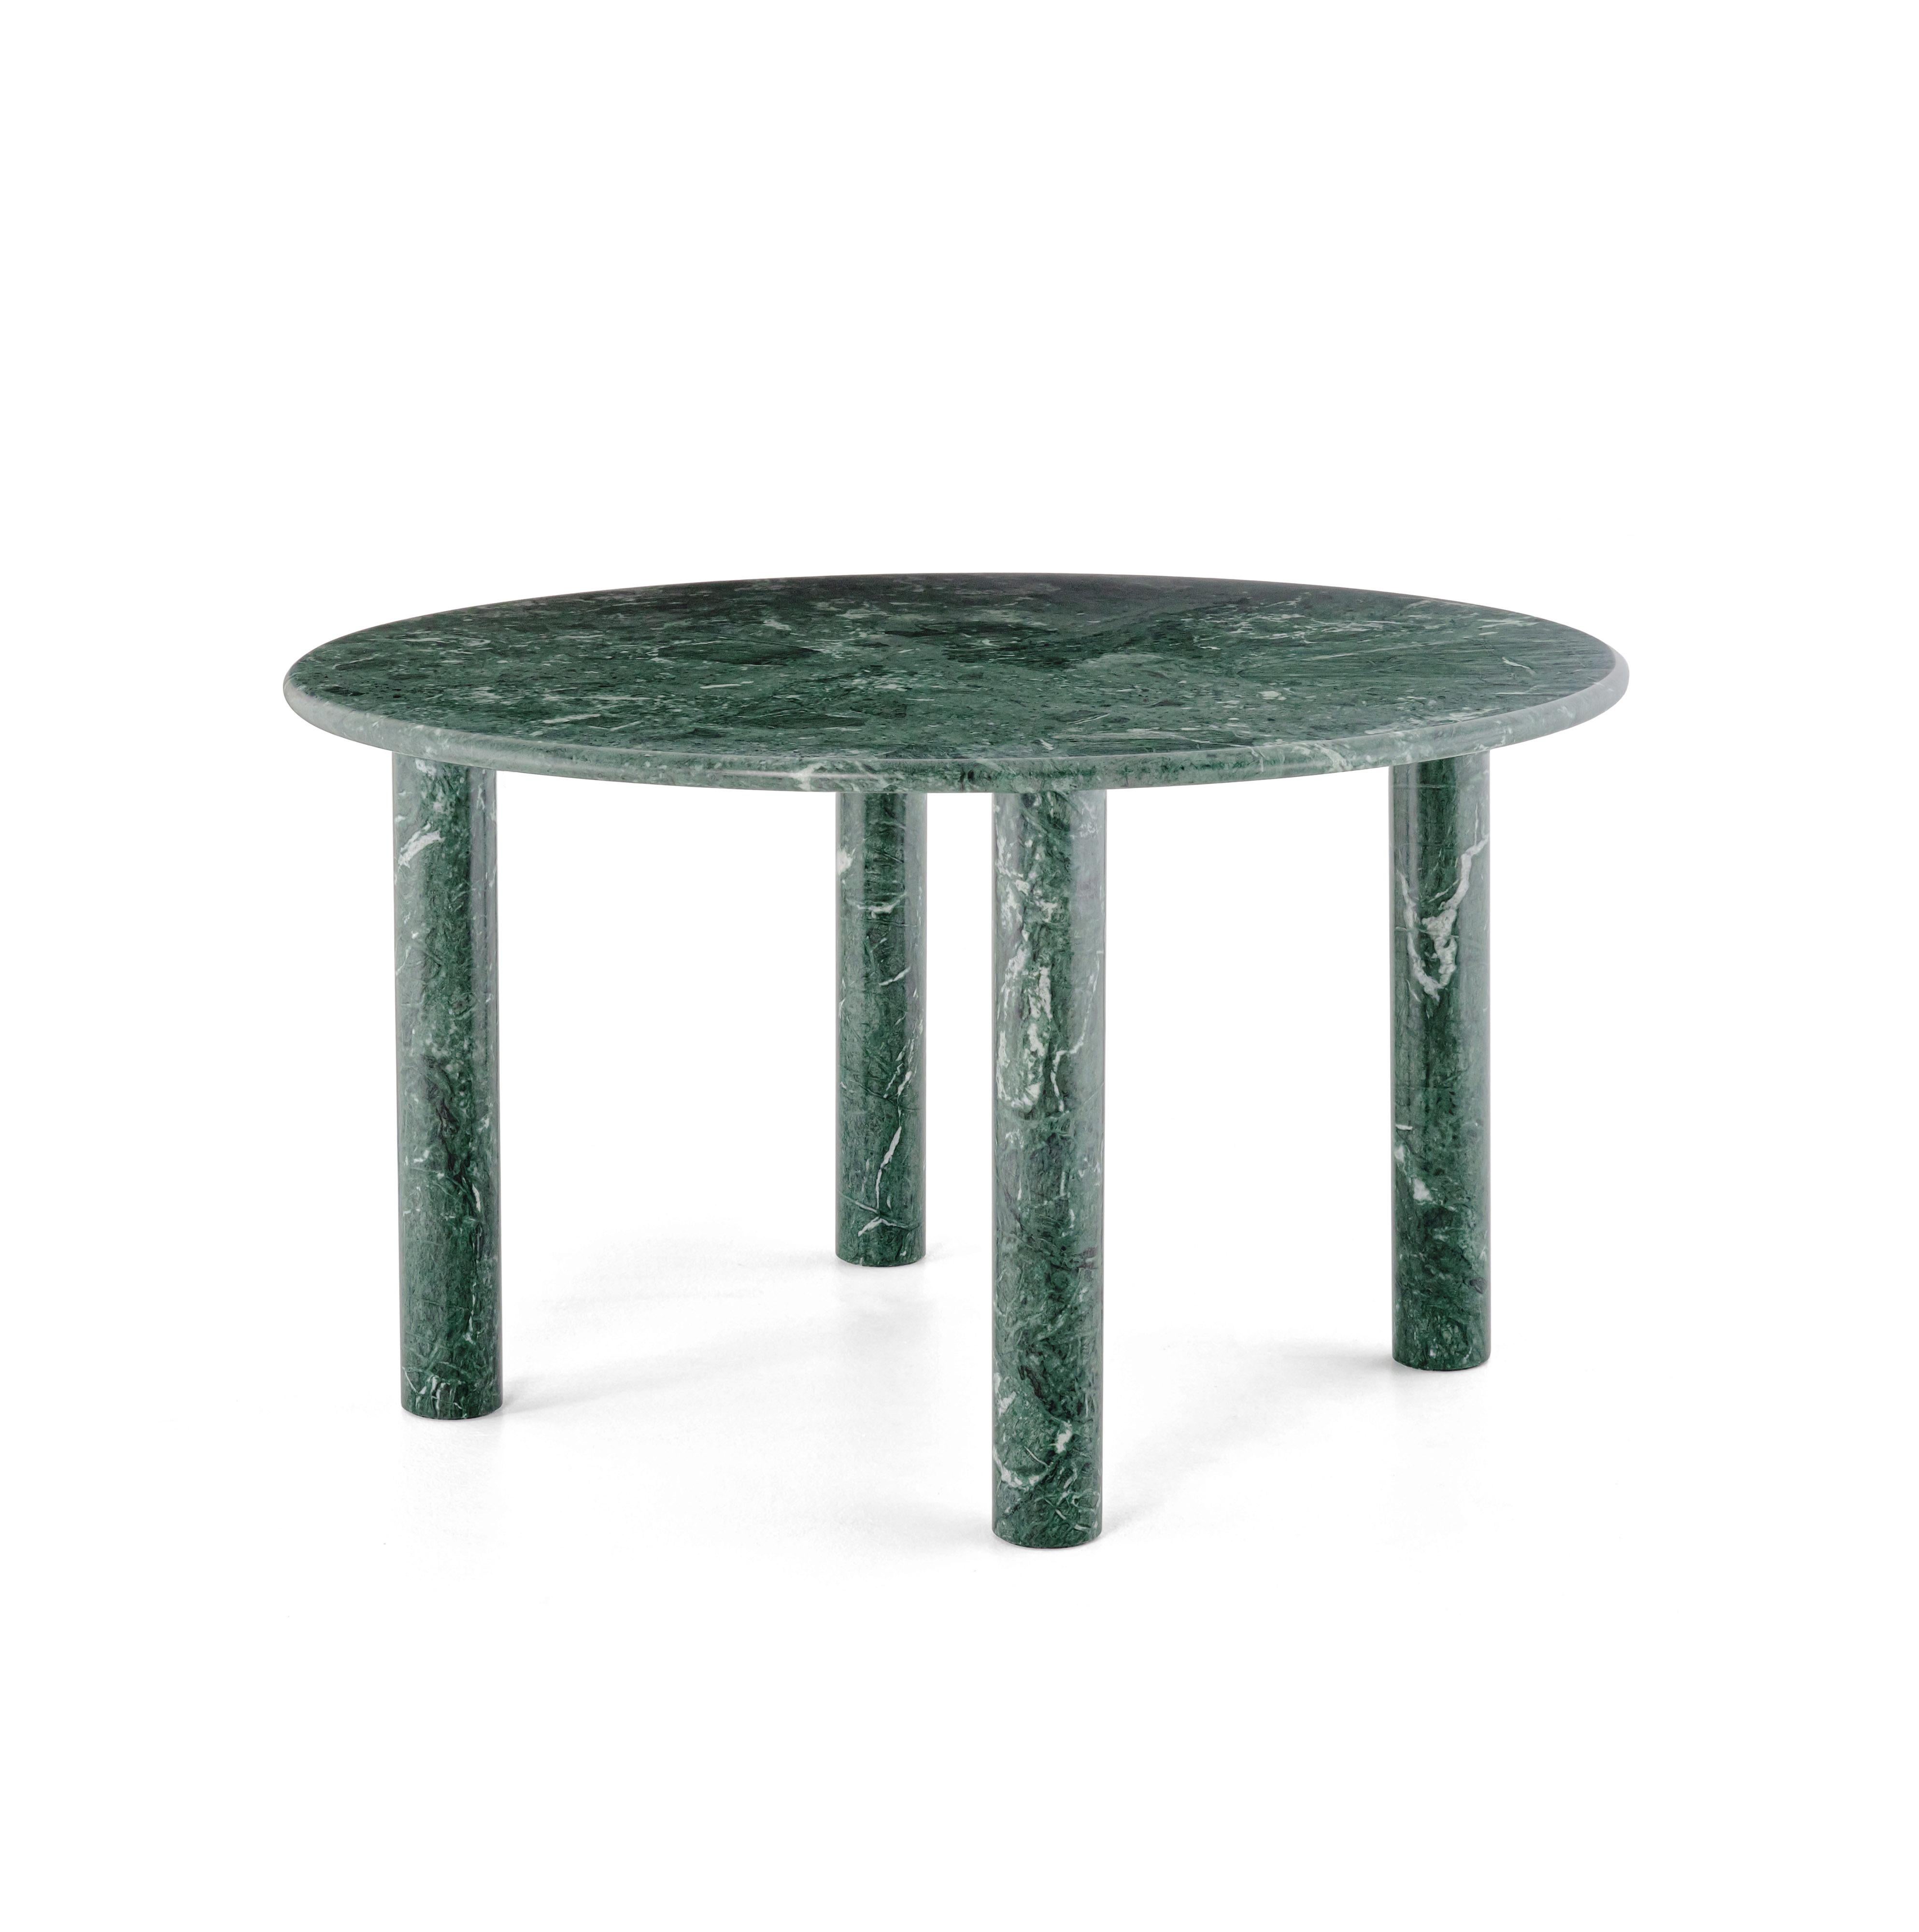 Dining round table 'PAUL' by Noom
Designer: Kateryna Sokolova


Model shown in picture: green marble - verde ocean
Dimensions: H 71 cm, Ø 130 cm

The table's design is a 